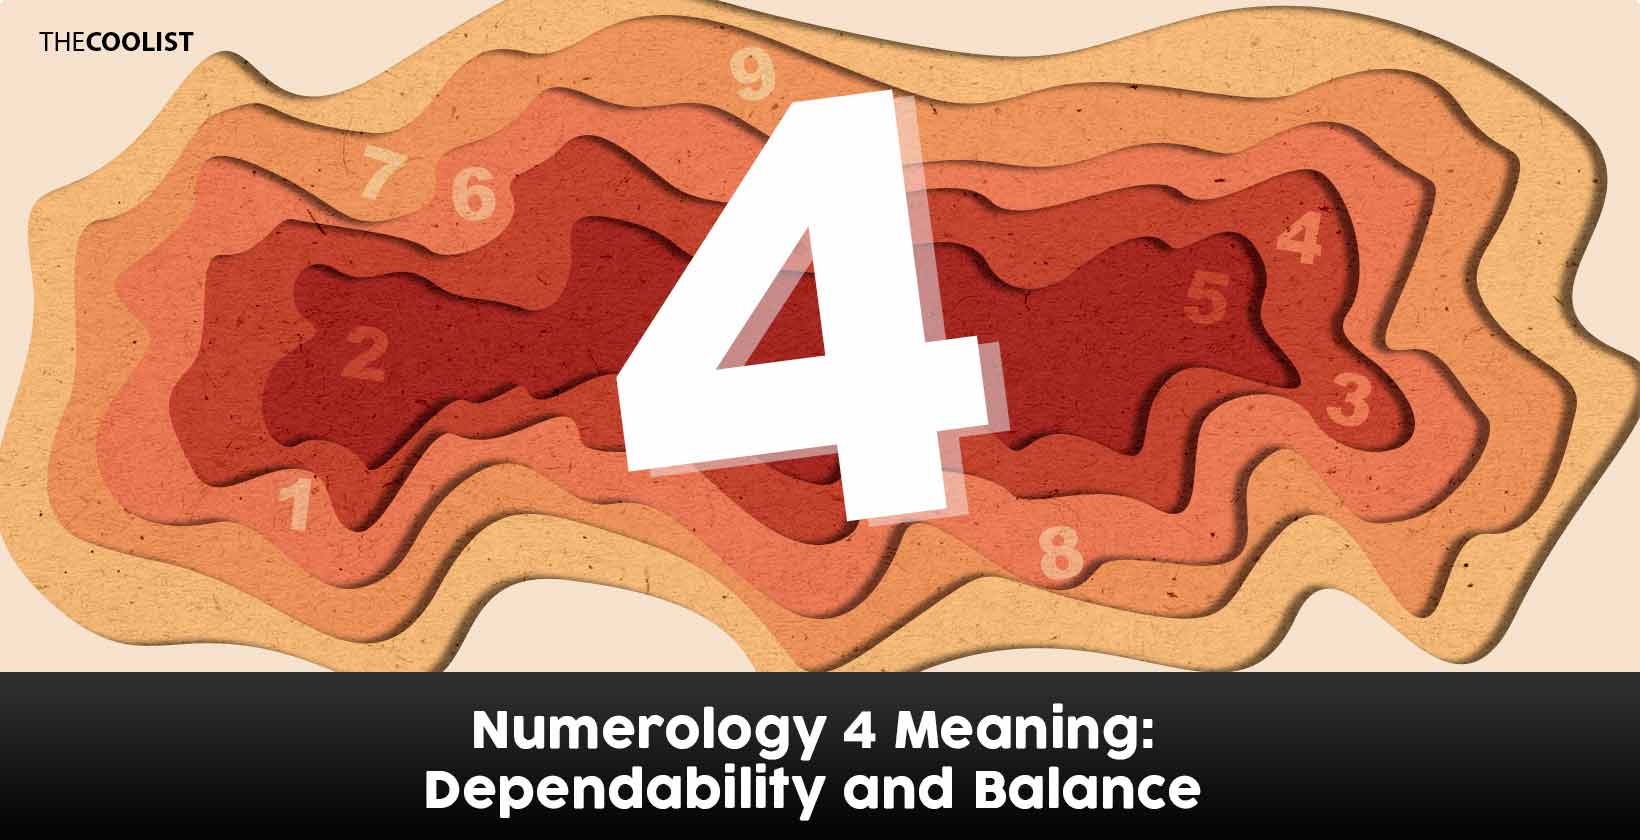 Numerology 4 Meaning: Dependability and Balance